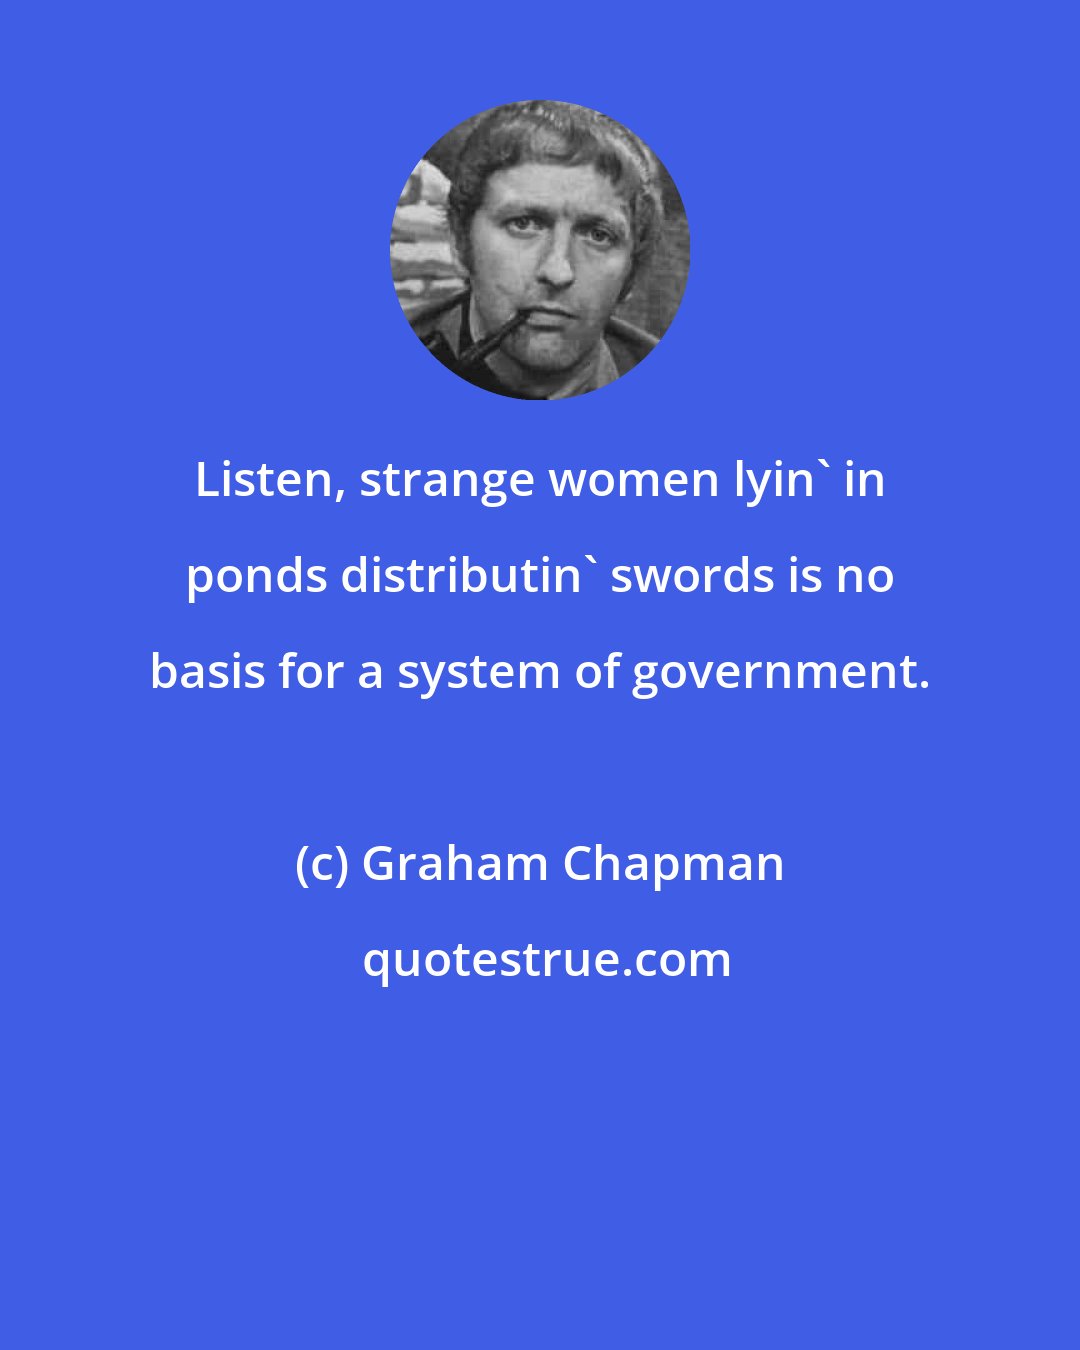 Graham Chapman: Listen, strange women lyin' in ponds distributin' swords is no basis for a system of government.